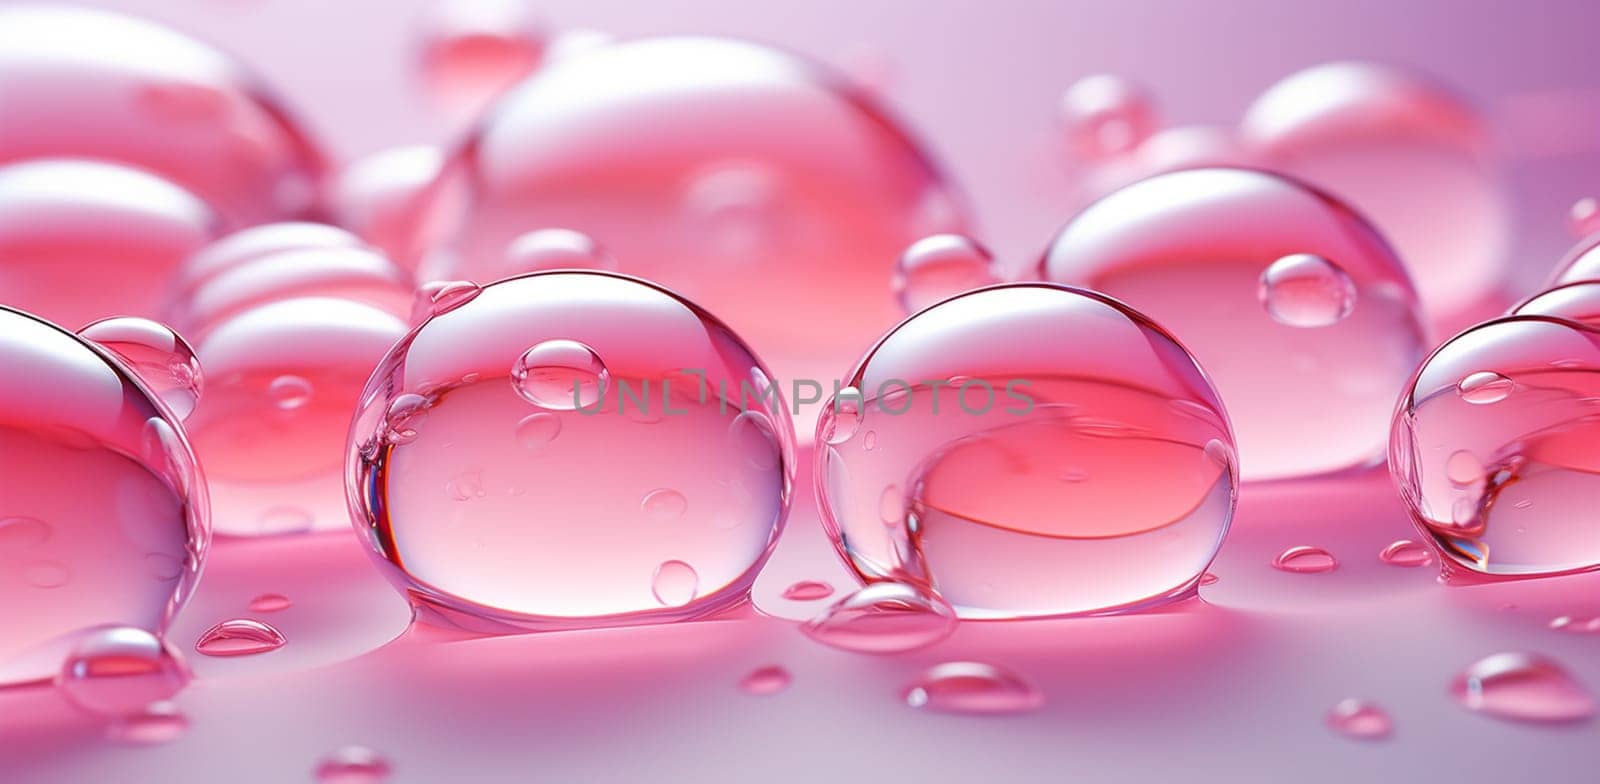 Pink abstract background with glass shining spheres. Backdrop design for product promotion. 3d rendering